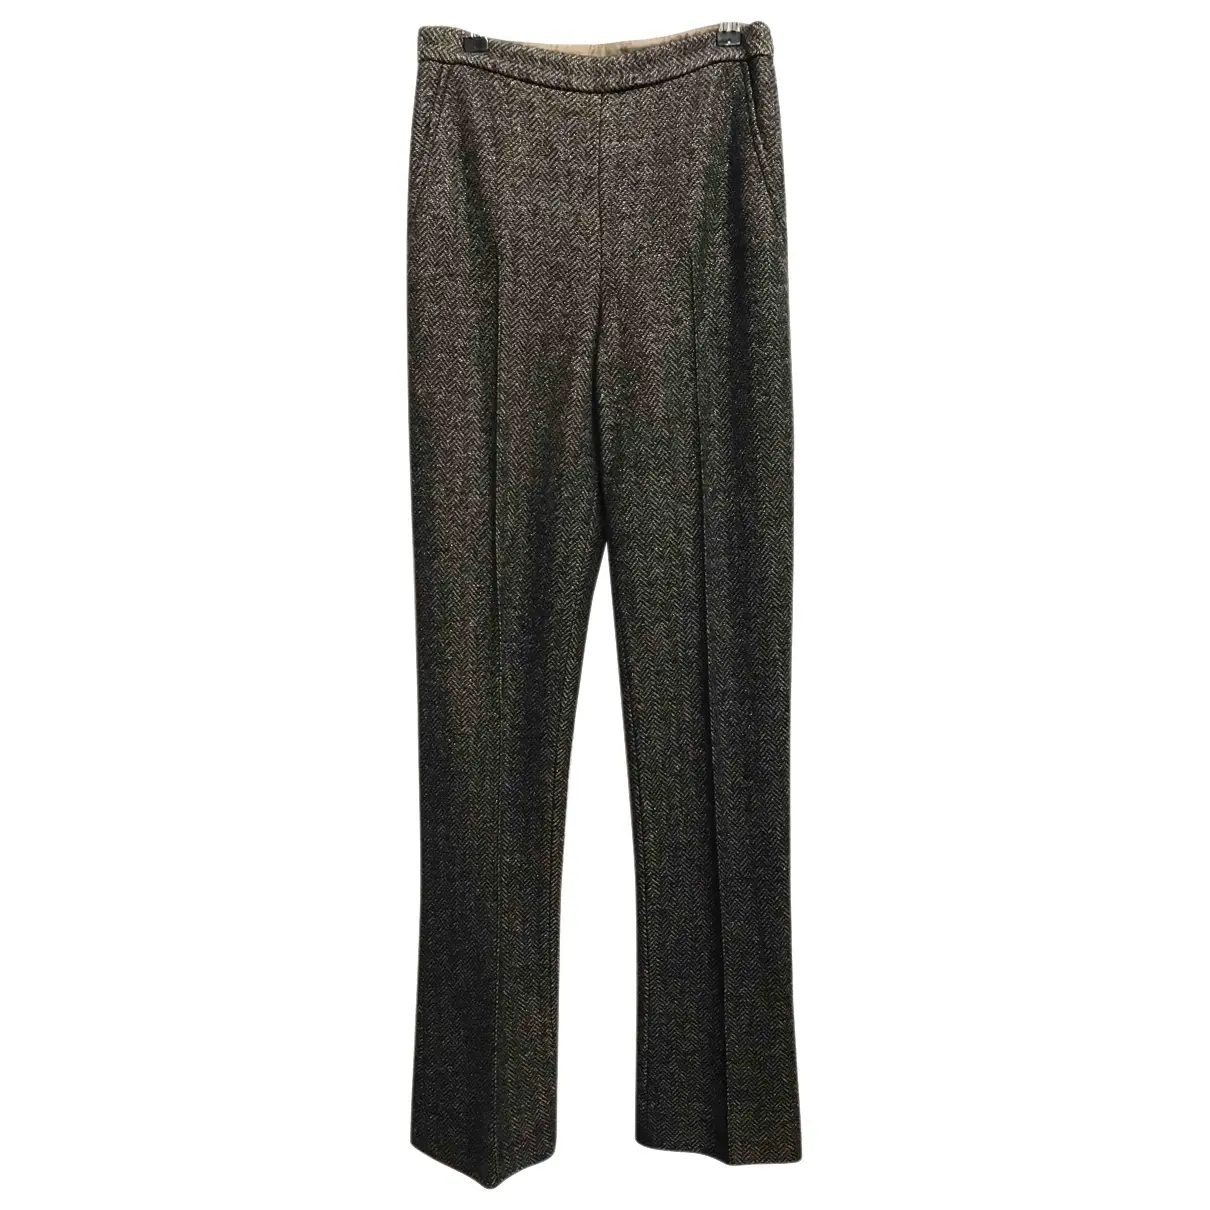 Wool trousers Ermanno Scervino